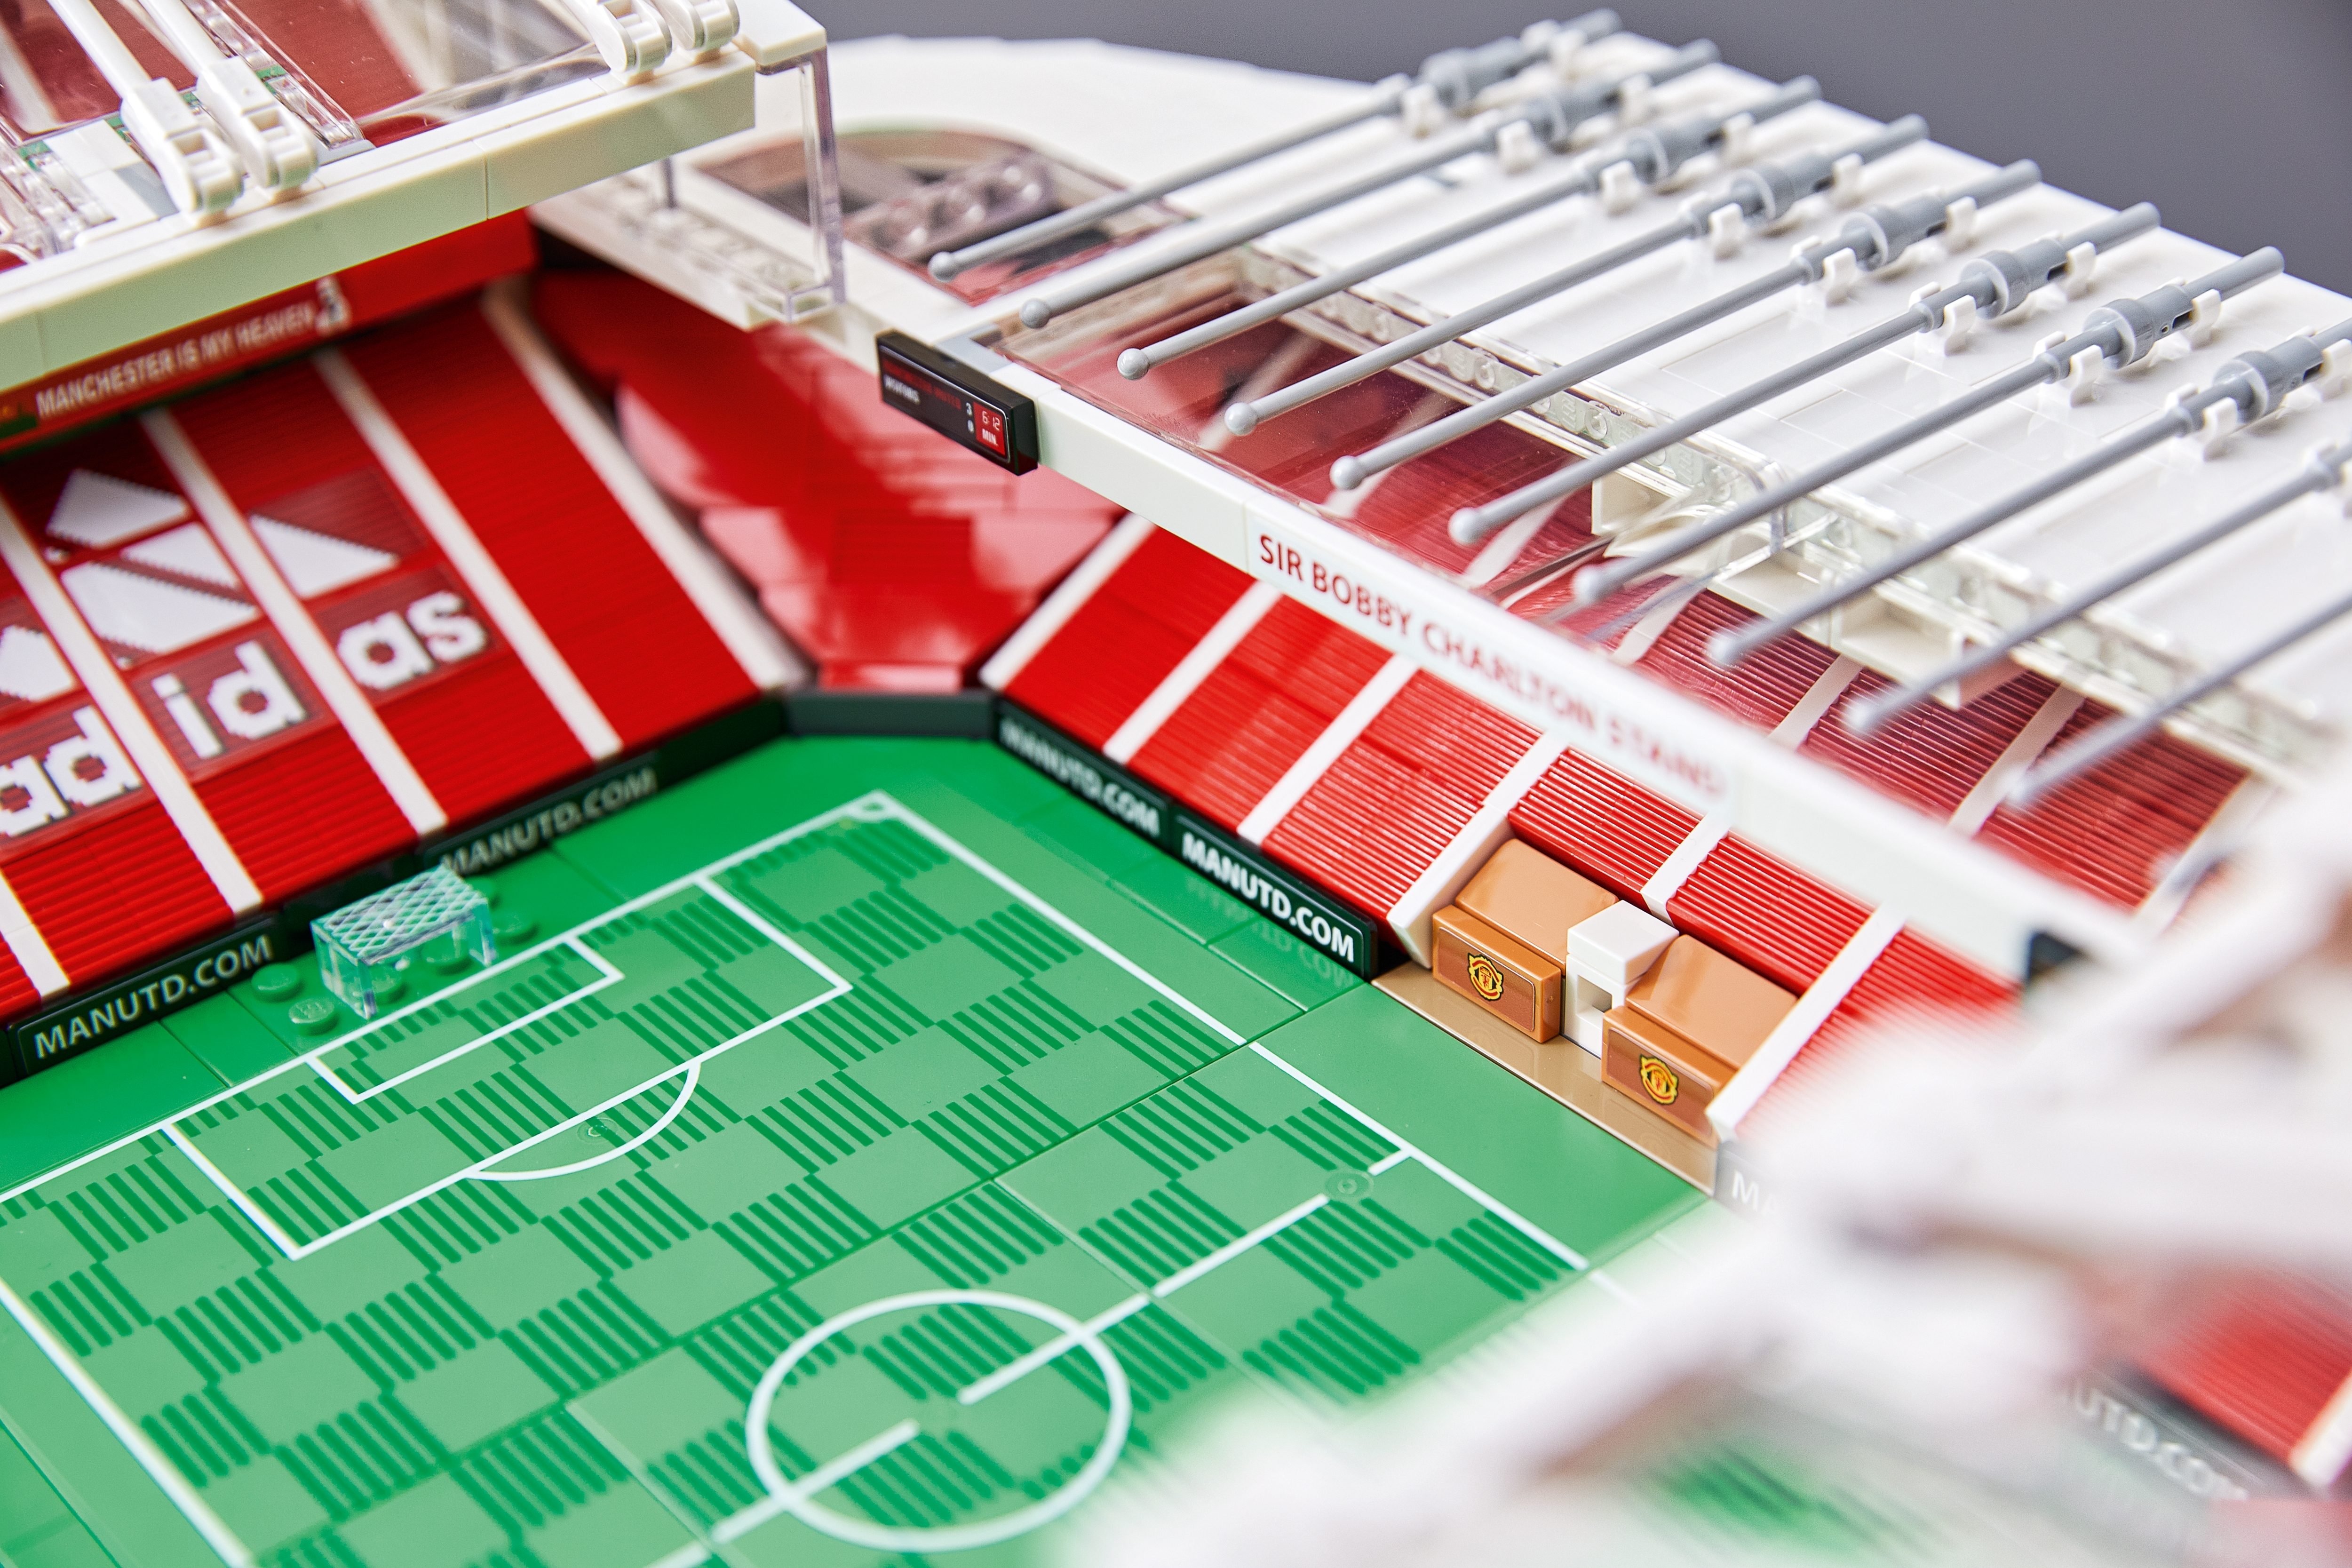 Kit de lumière pour LEGO® 10272 Old Trafford - Manchester United, 119.00 CHF